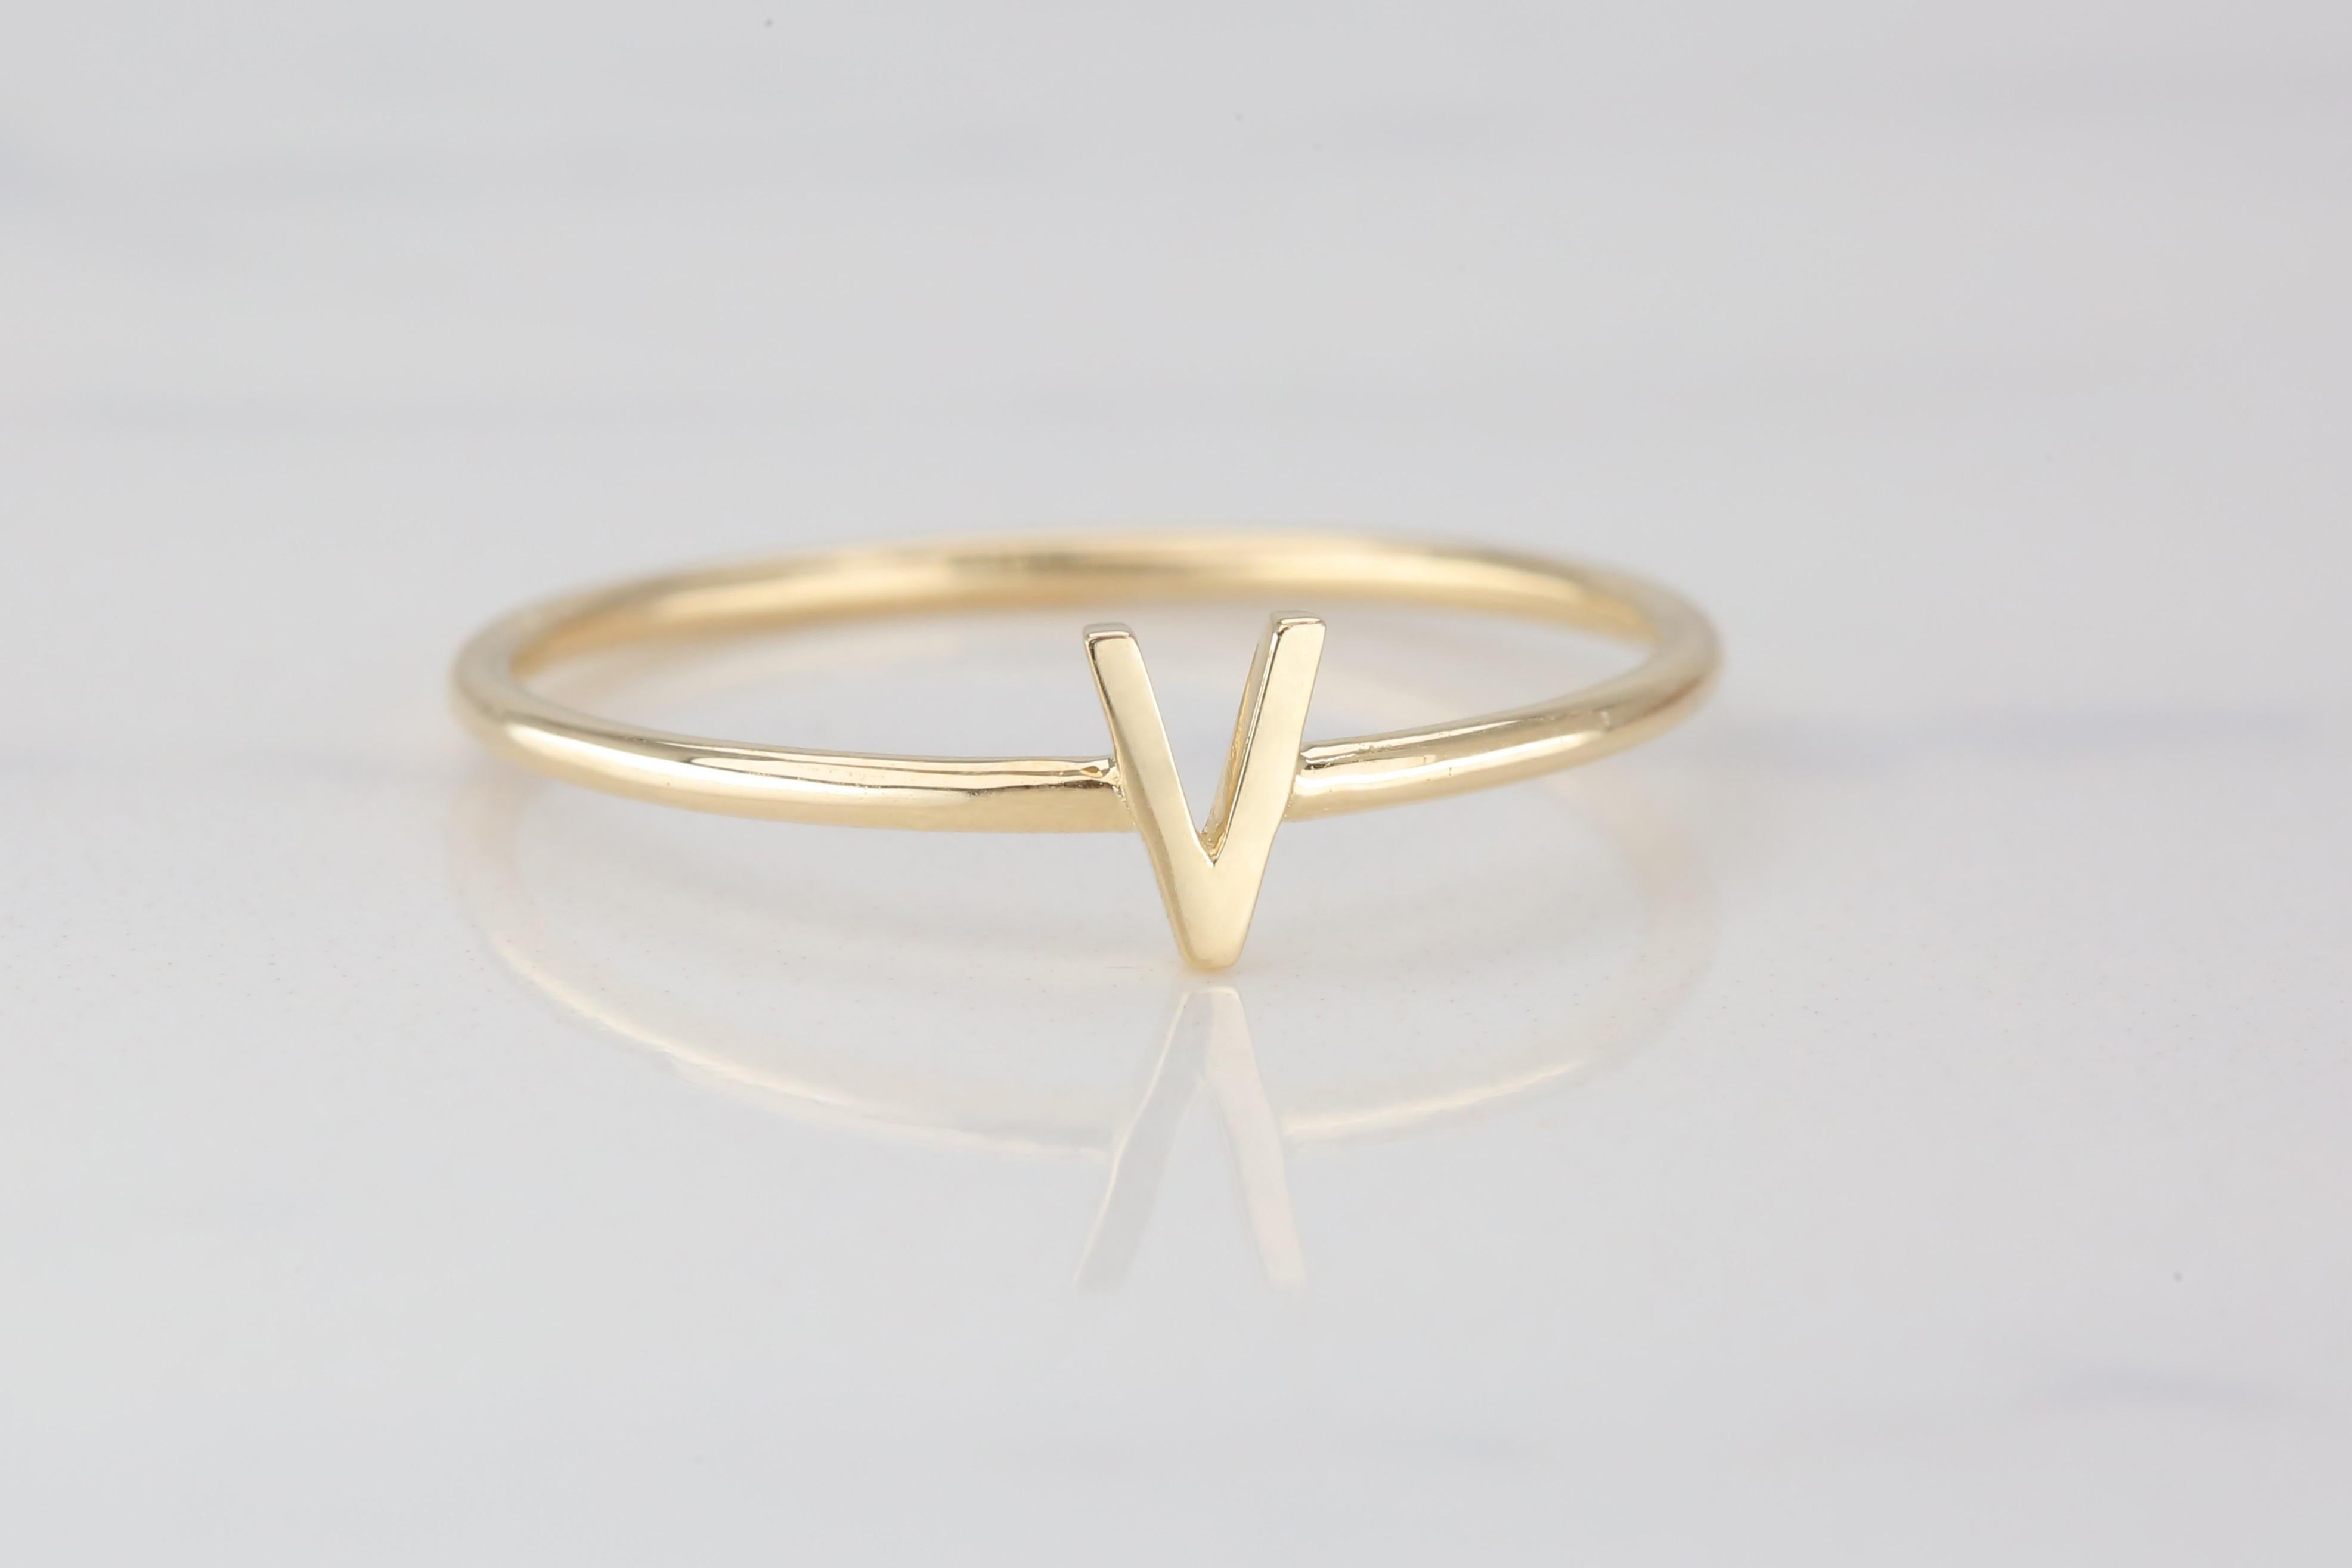 For Sale:  14K Gold Initial V Letter Ring, Personalized Initial Letter Ring 3